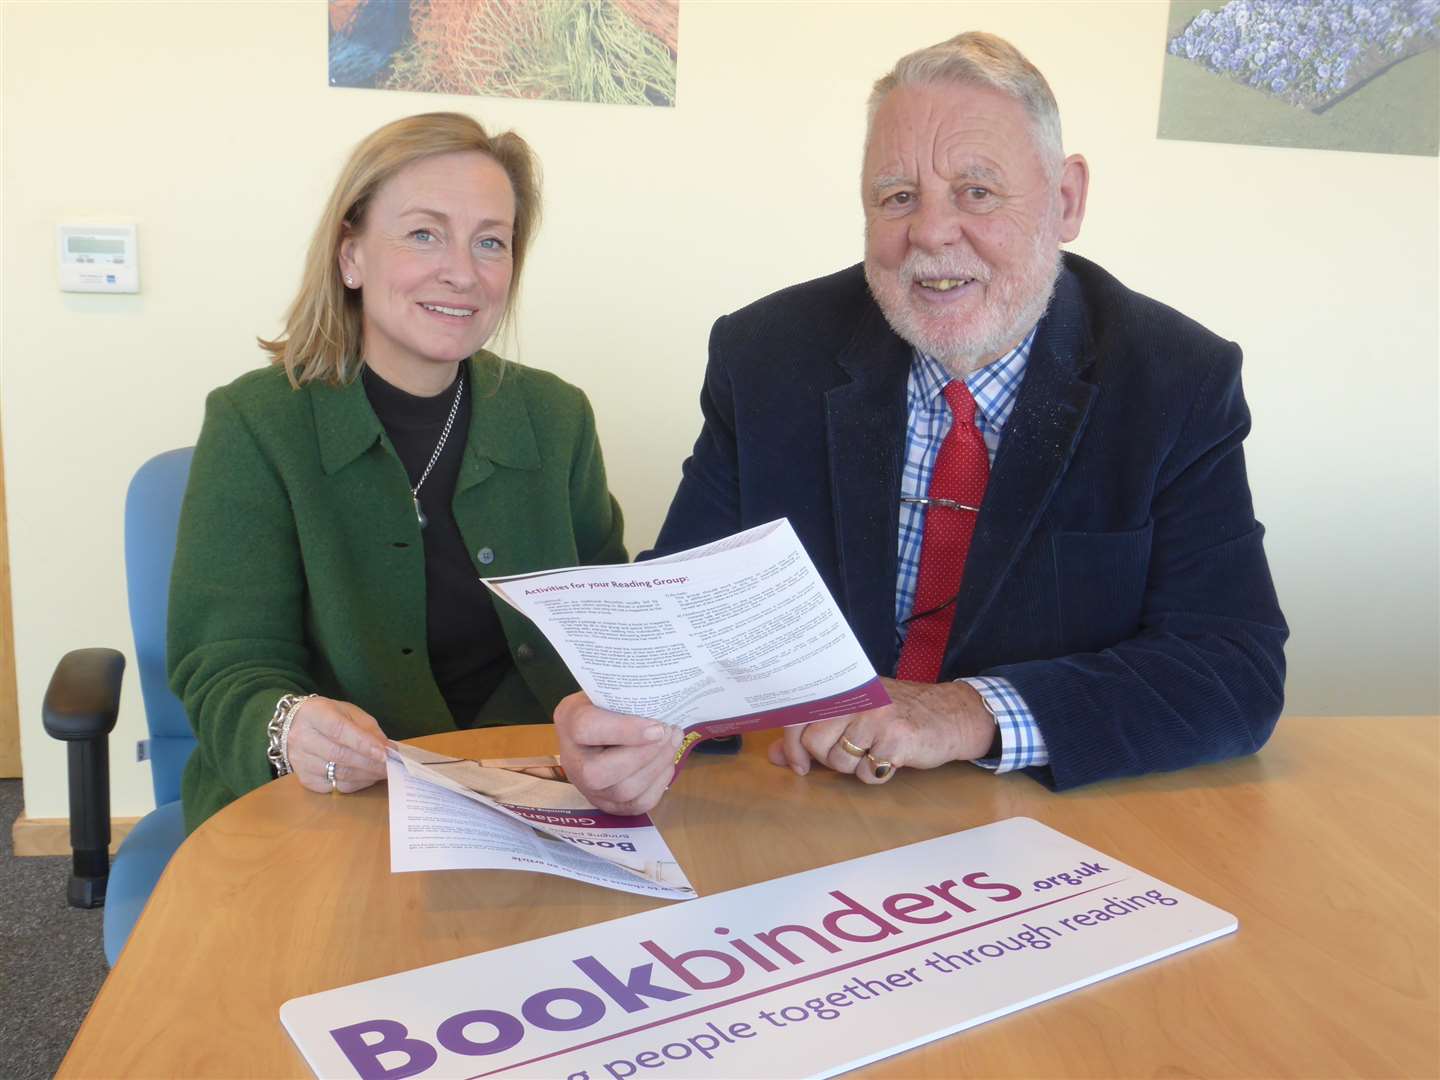 Terry Waite CBE, pictured with KM Group chairman Geraldine Allinson to promote the Bookbinders literacy scheme, is backing the Kent Literacy Awards. (1292218)